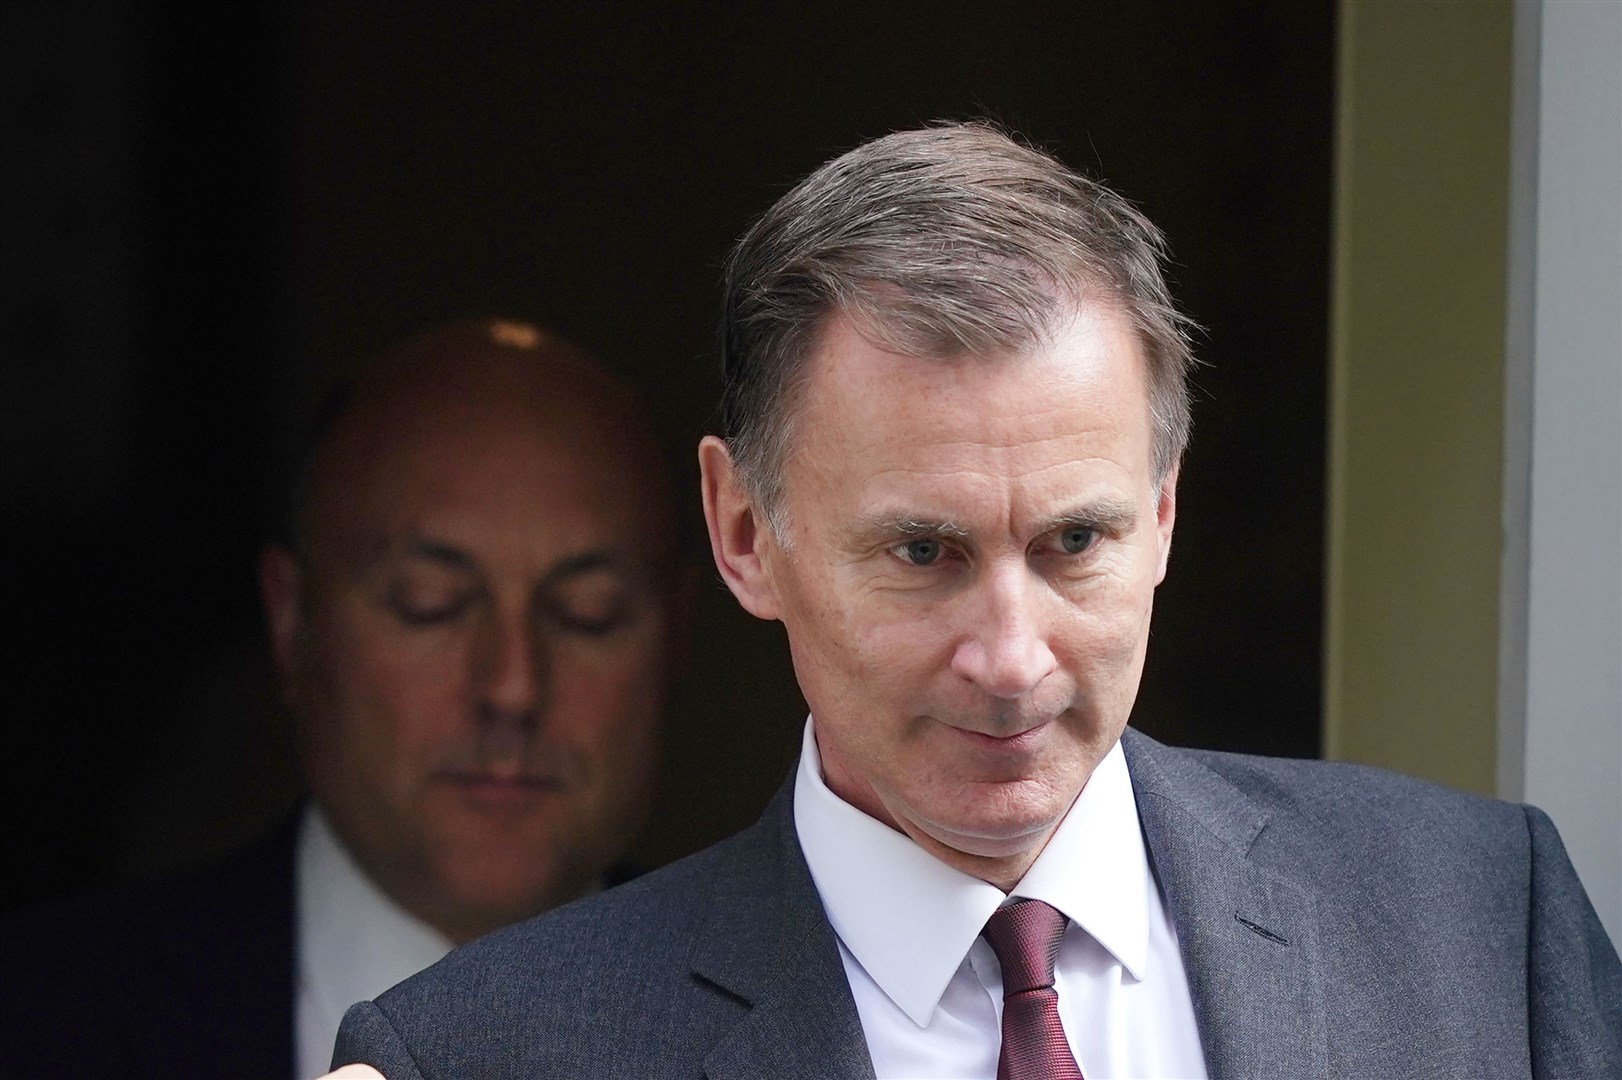 Councils have called on Chancellor Jeremy Hunt to provide more funding for children’s social care. (Aaron Chown/PA)